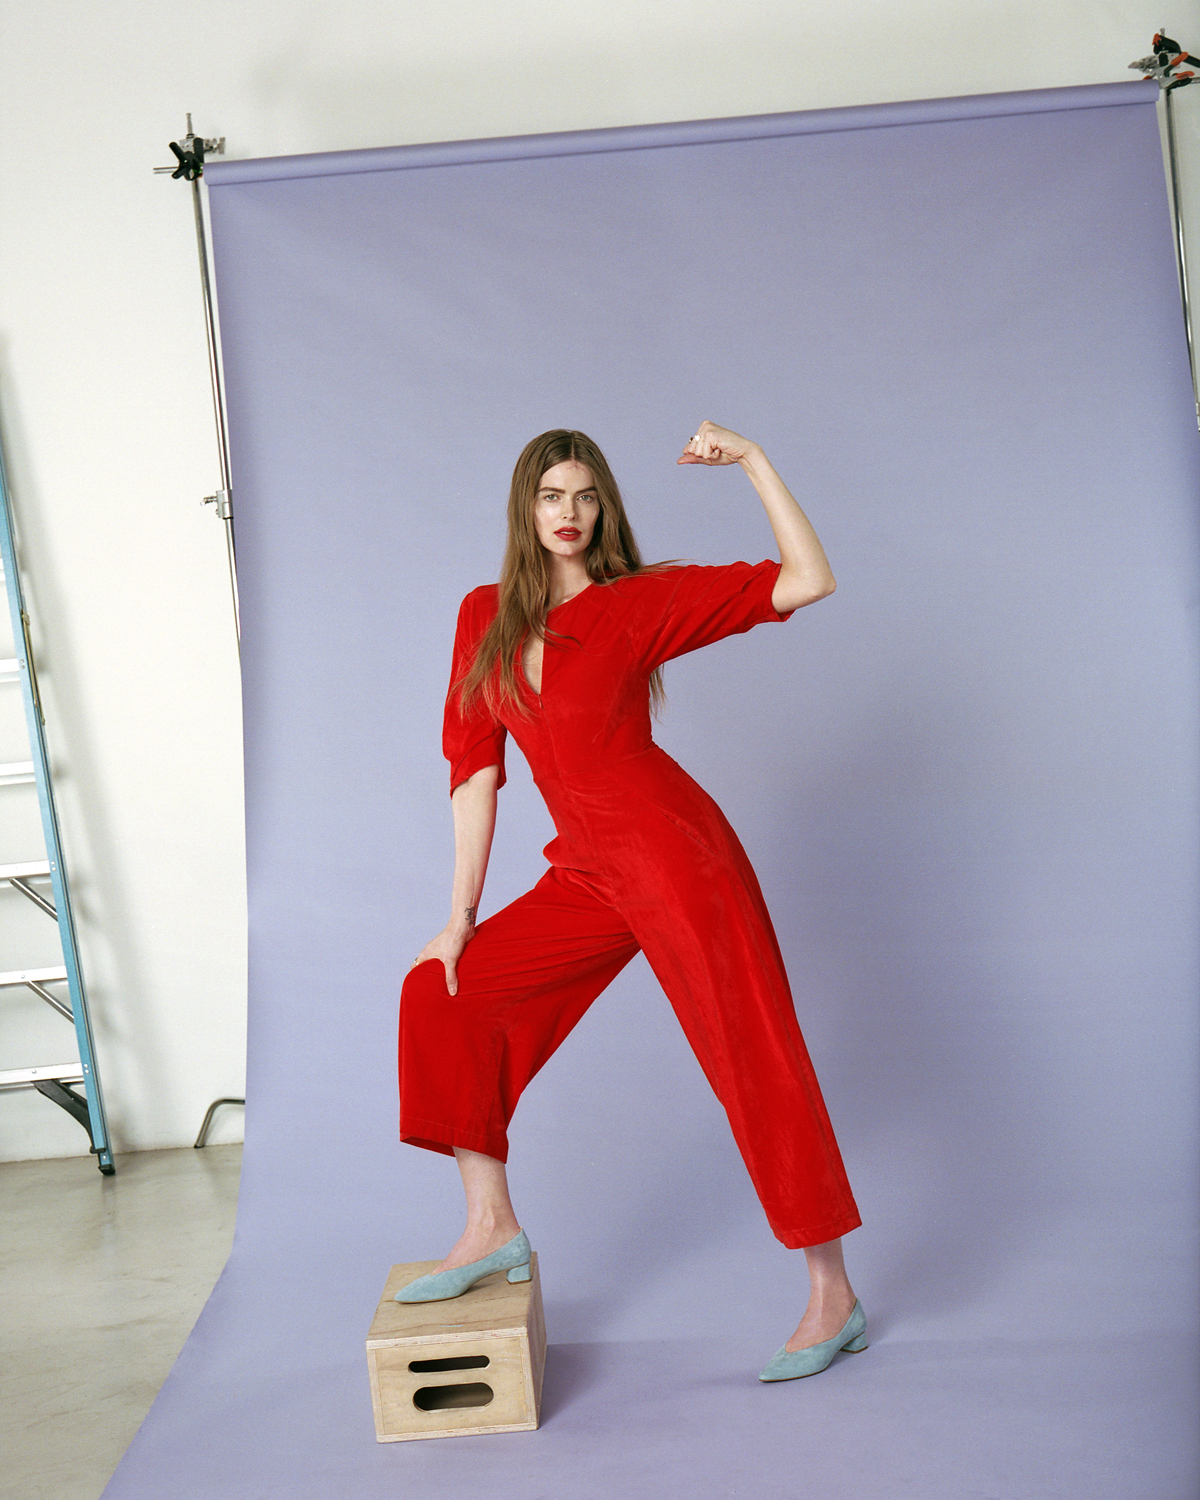 Robyn Lawley for The Frontlash